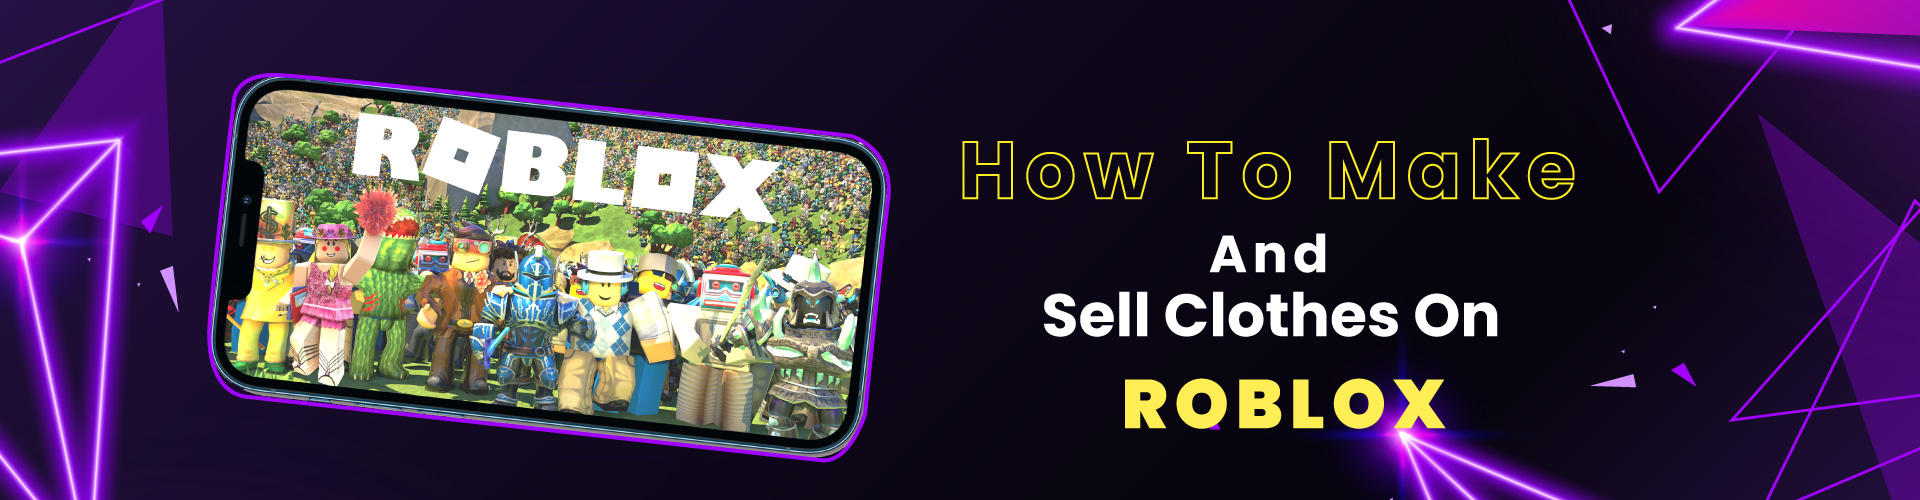 How To Make And Sell Clothes On ROBLOX – 8 Easy Steps